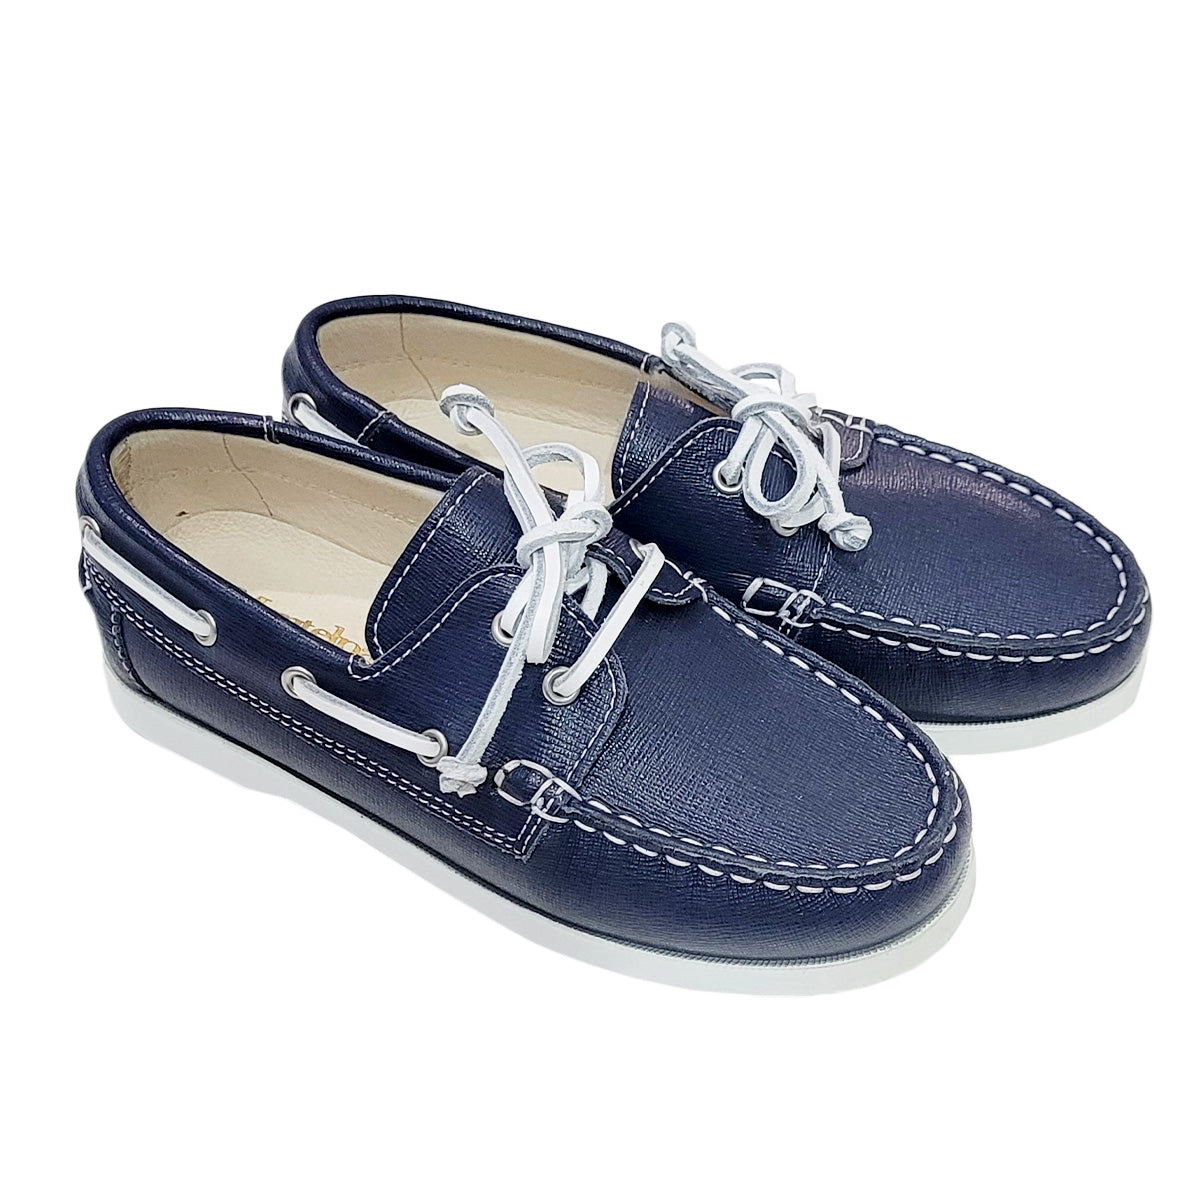 Andrea Montelpare Tradition Shoe -Navy Blue